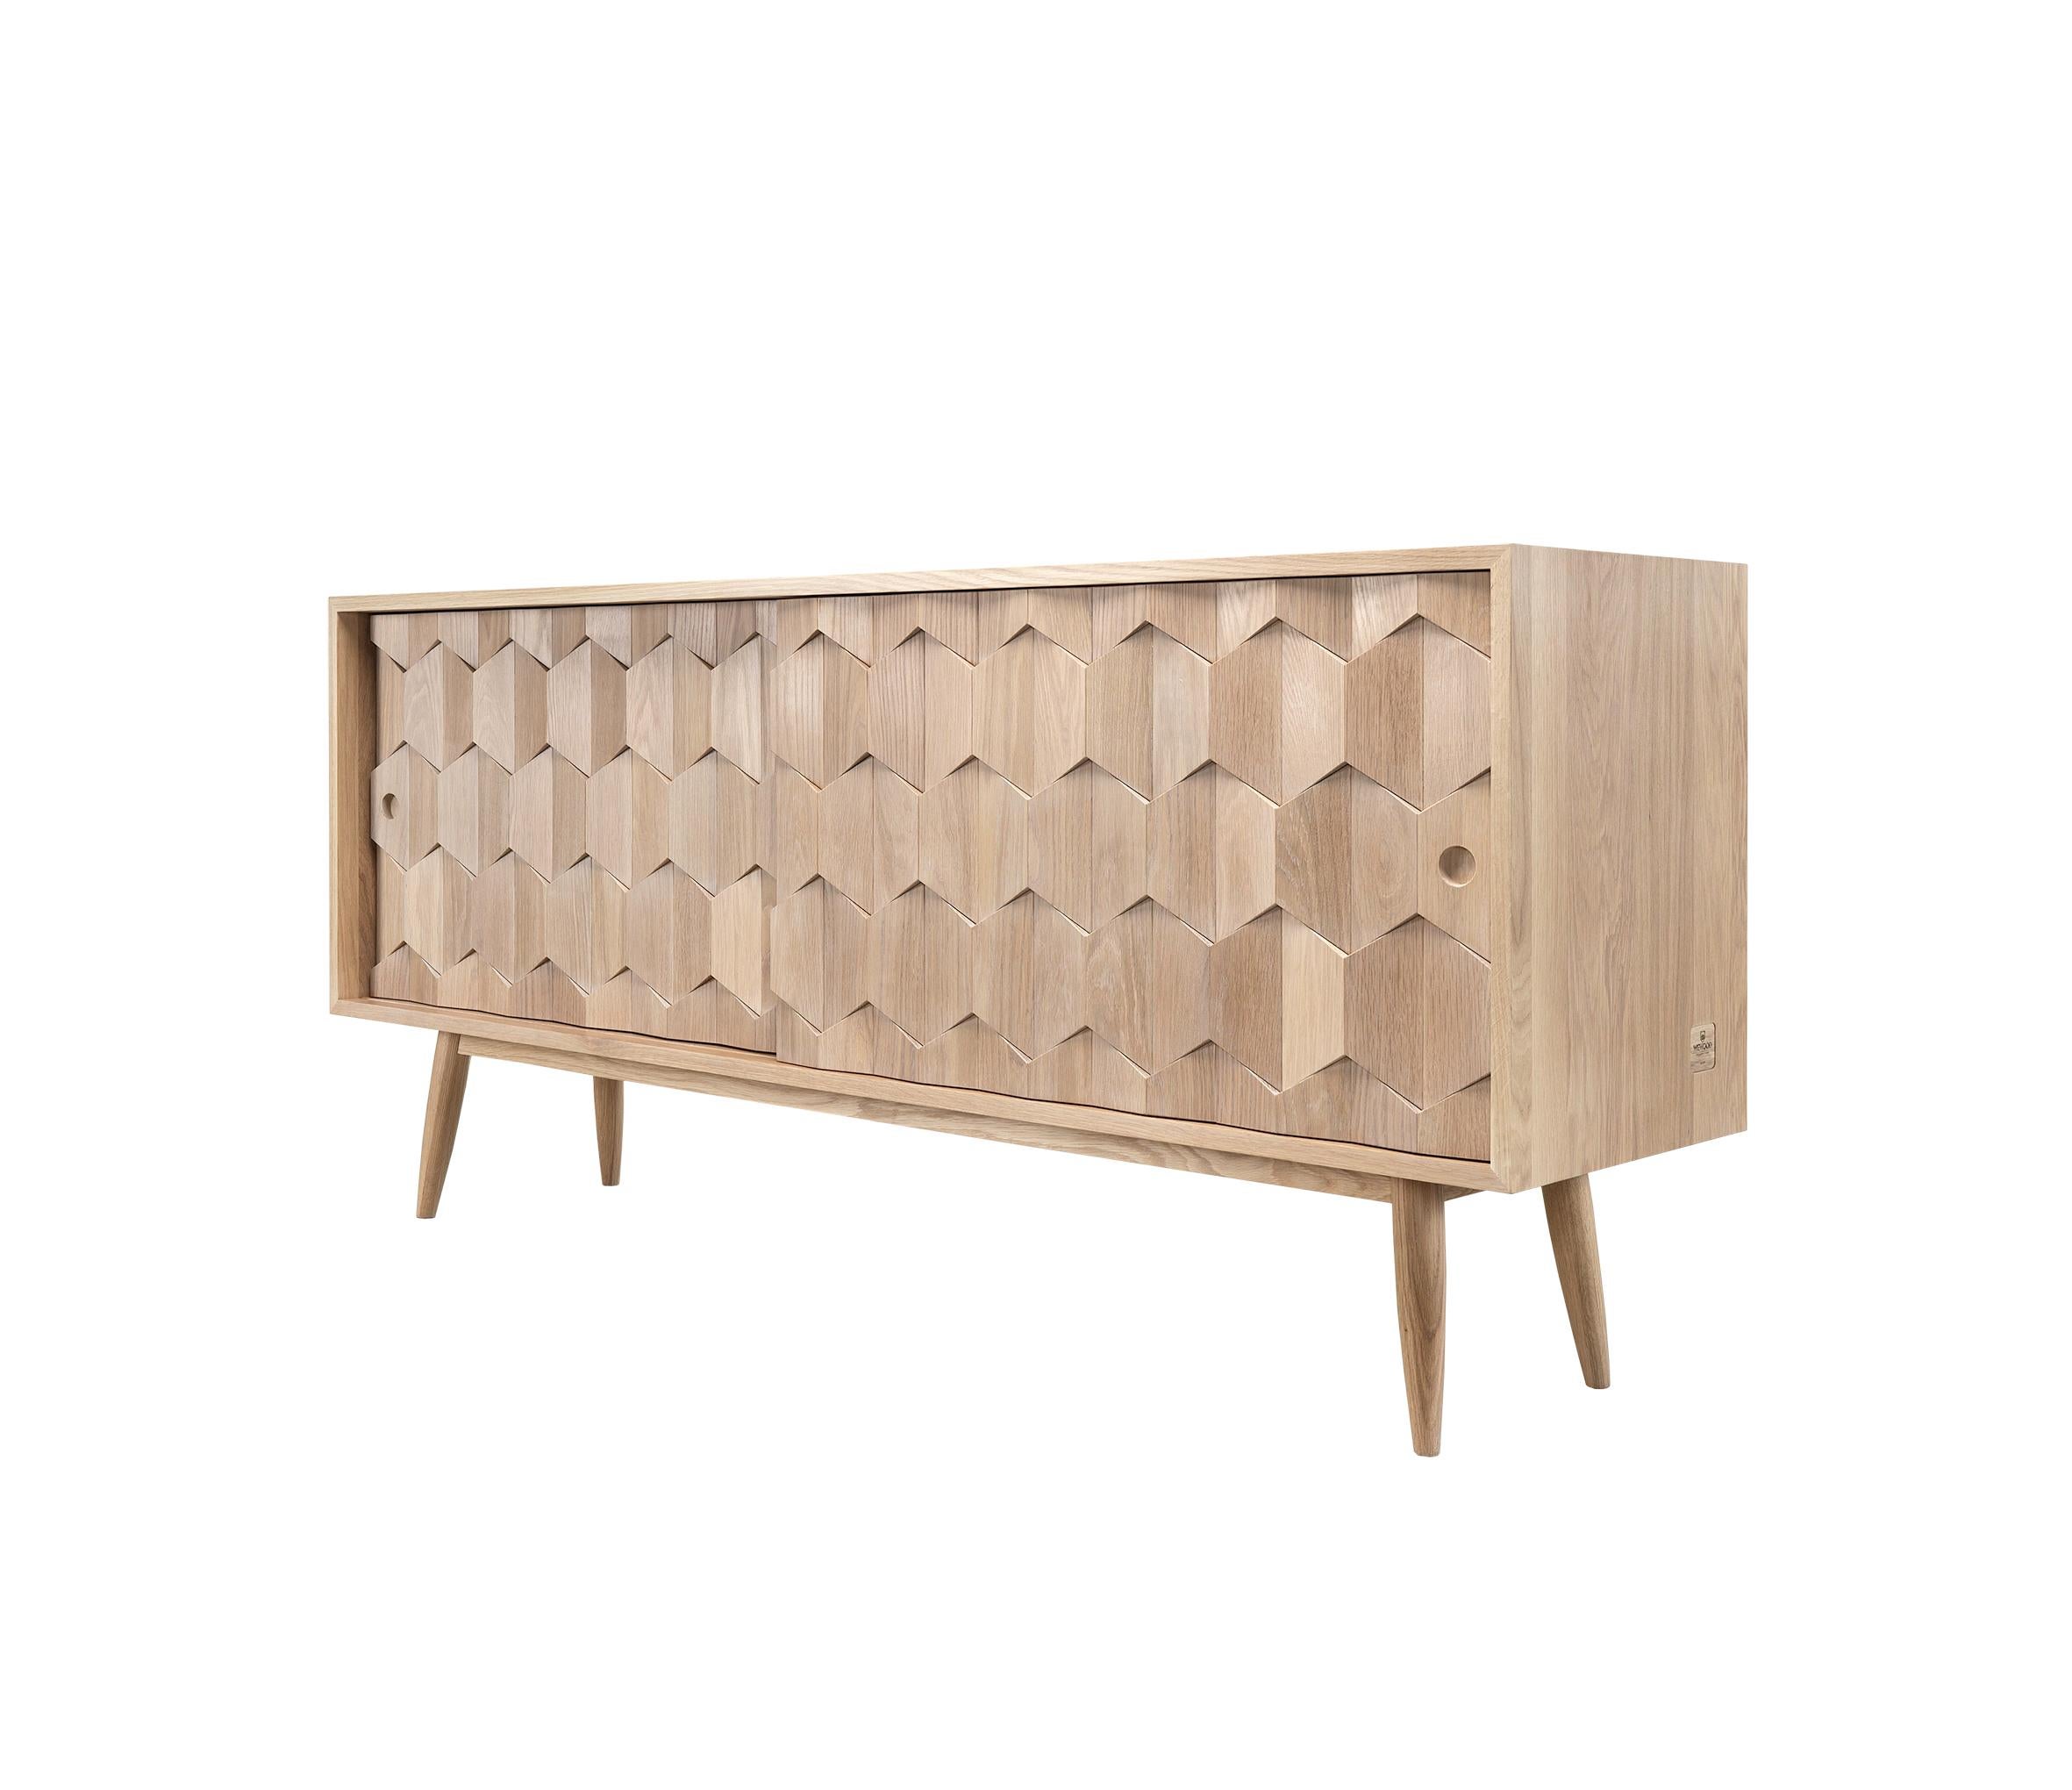 Very elegant and solid walnut or oak rectangular sideboard.
It has two hidden drawers and four divisions divided by adjustable shelves that allows you to store any type of objects. Details on the doors assembled by hand.
Packed in a plywood box